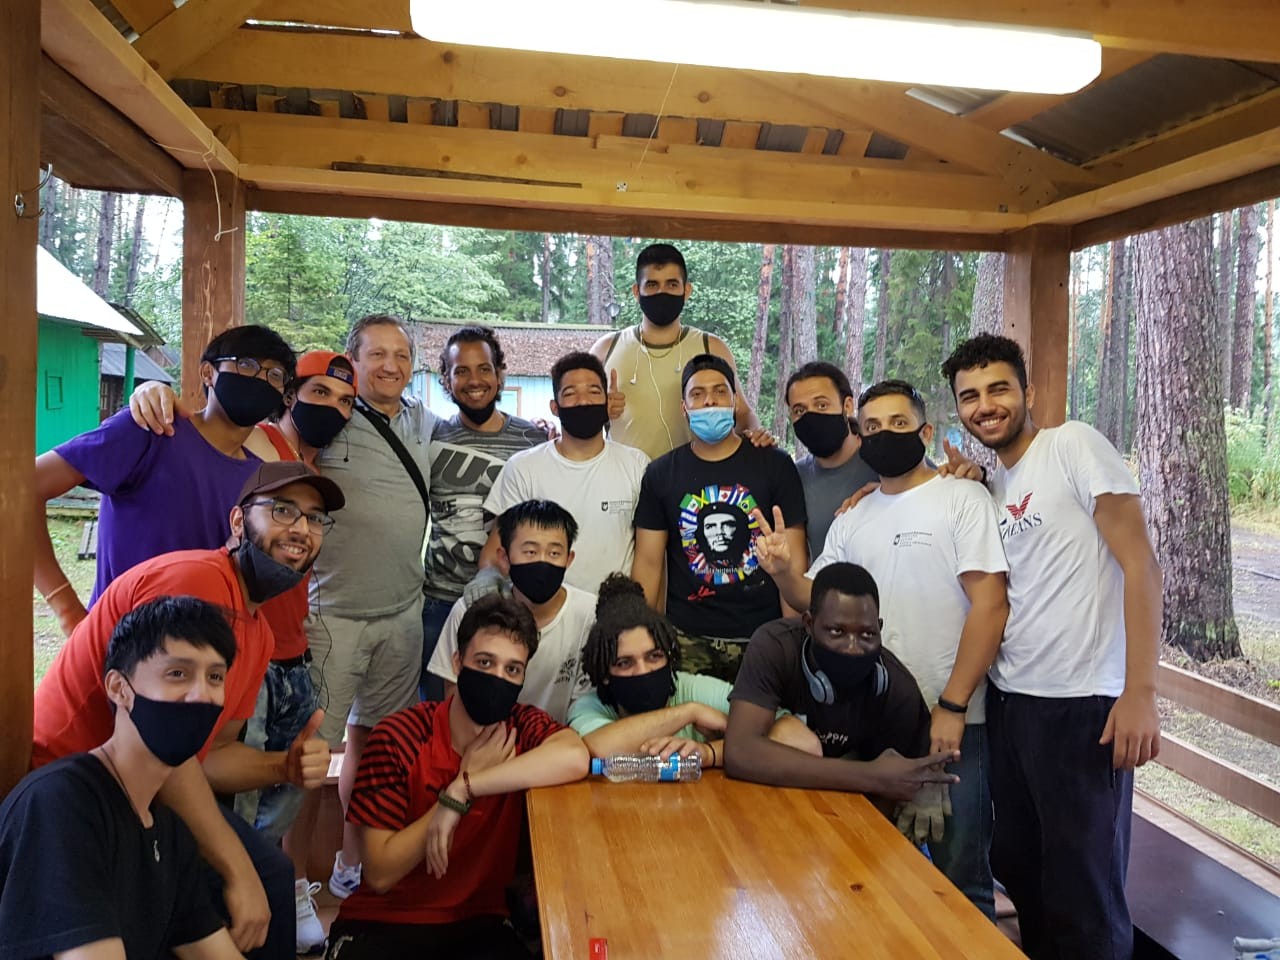 International students continue their work and study shift at Yalchik Camp